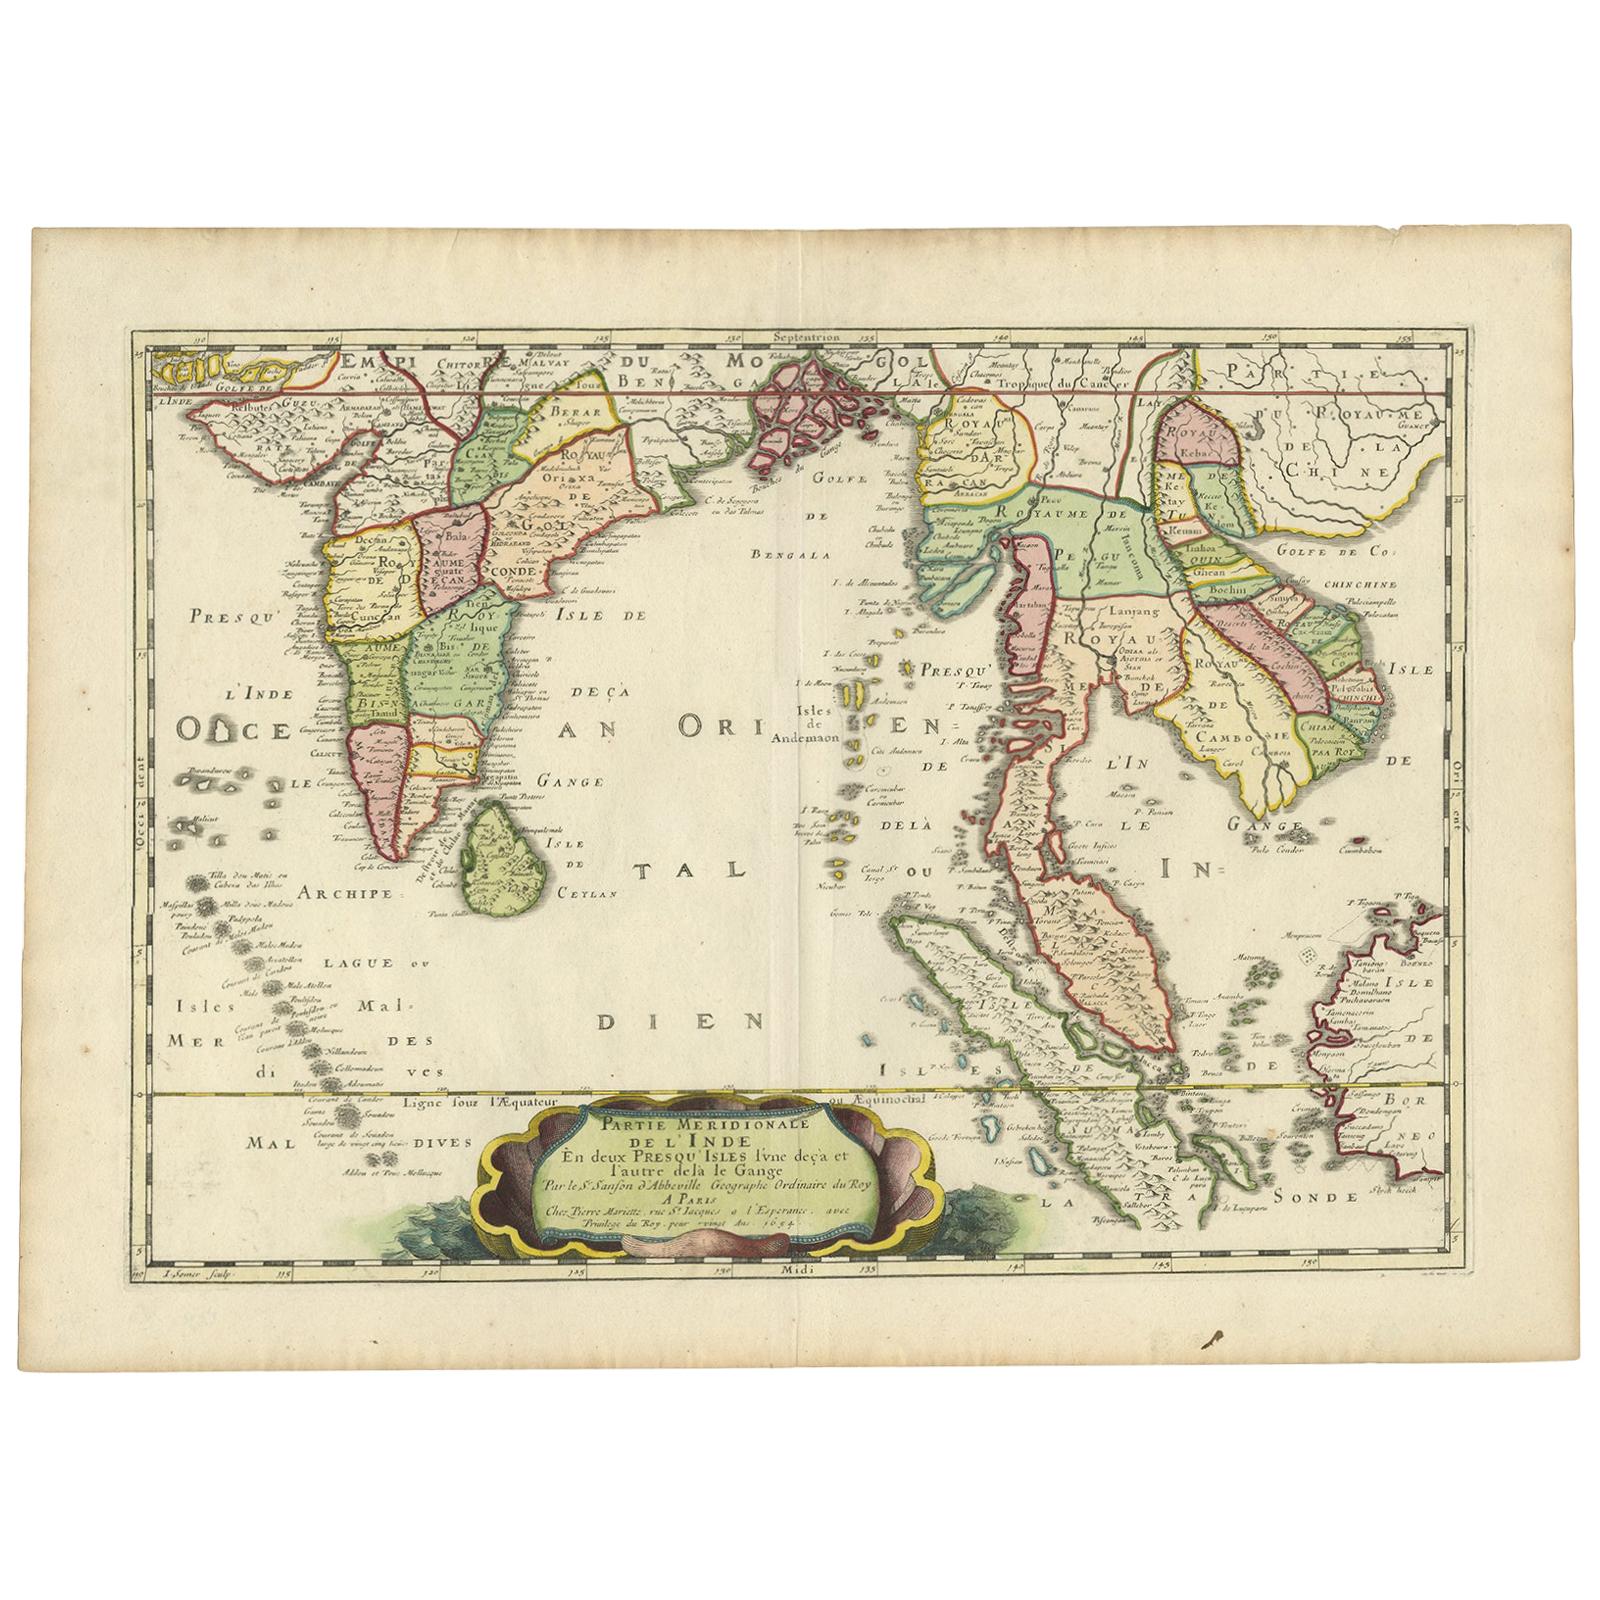 Antique Map of India and Southeast Asia by Sanson '1654'